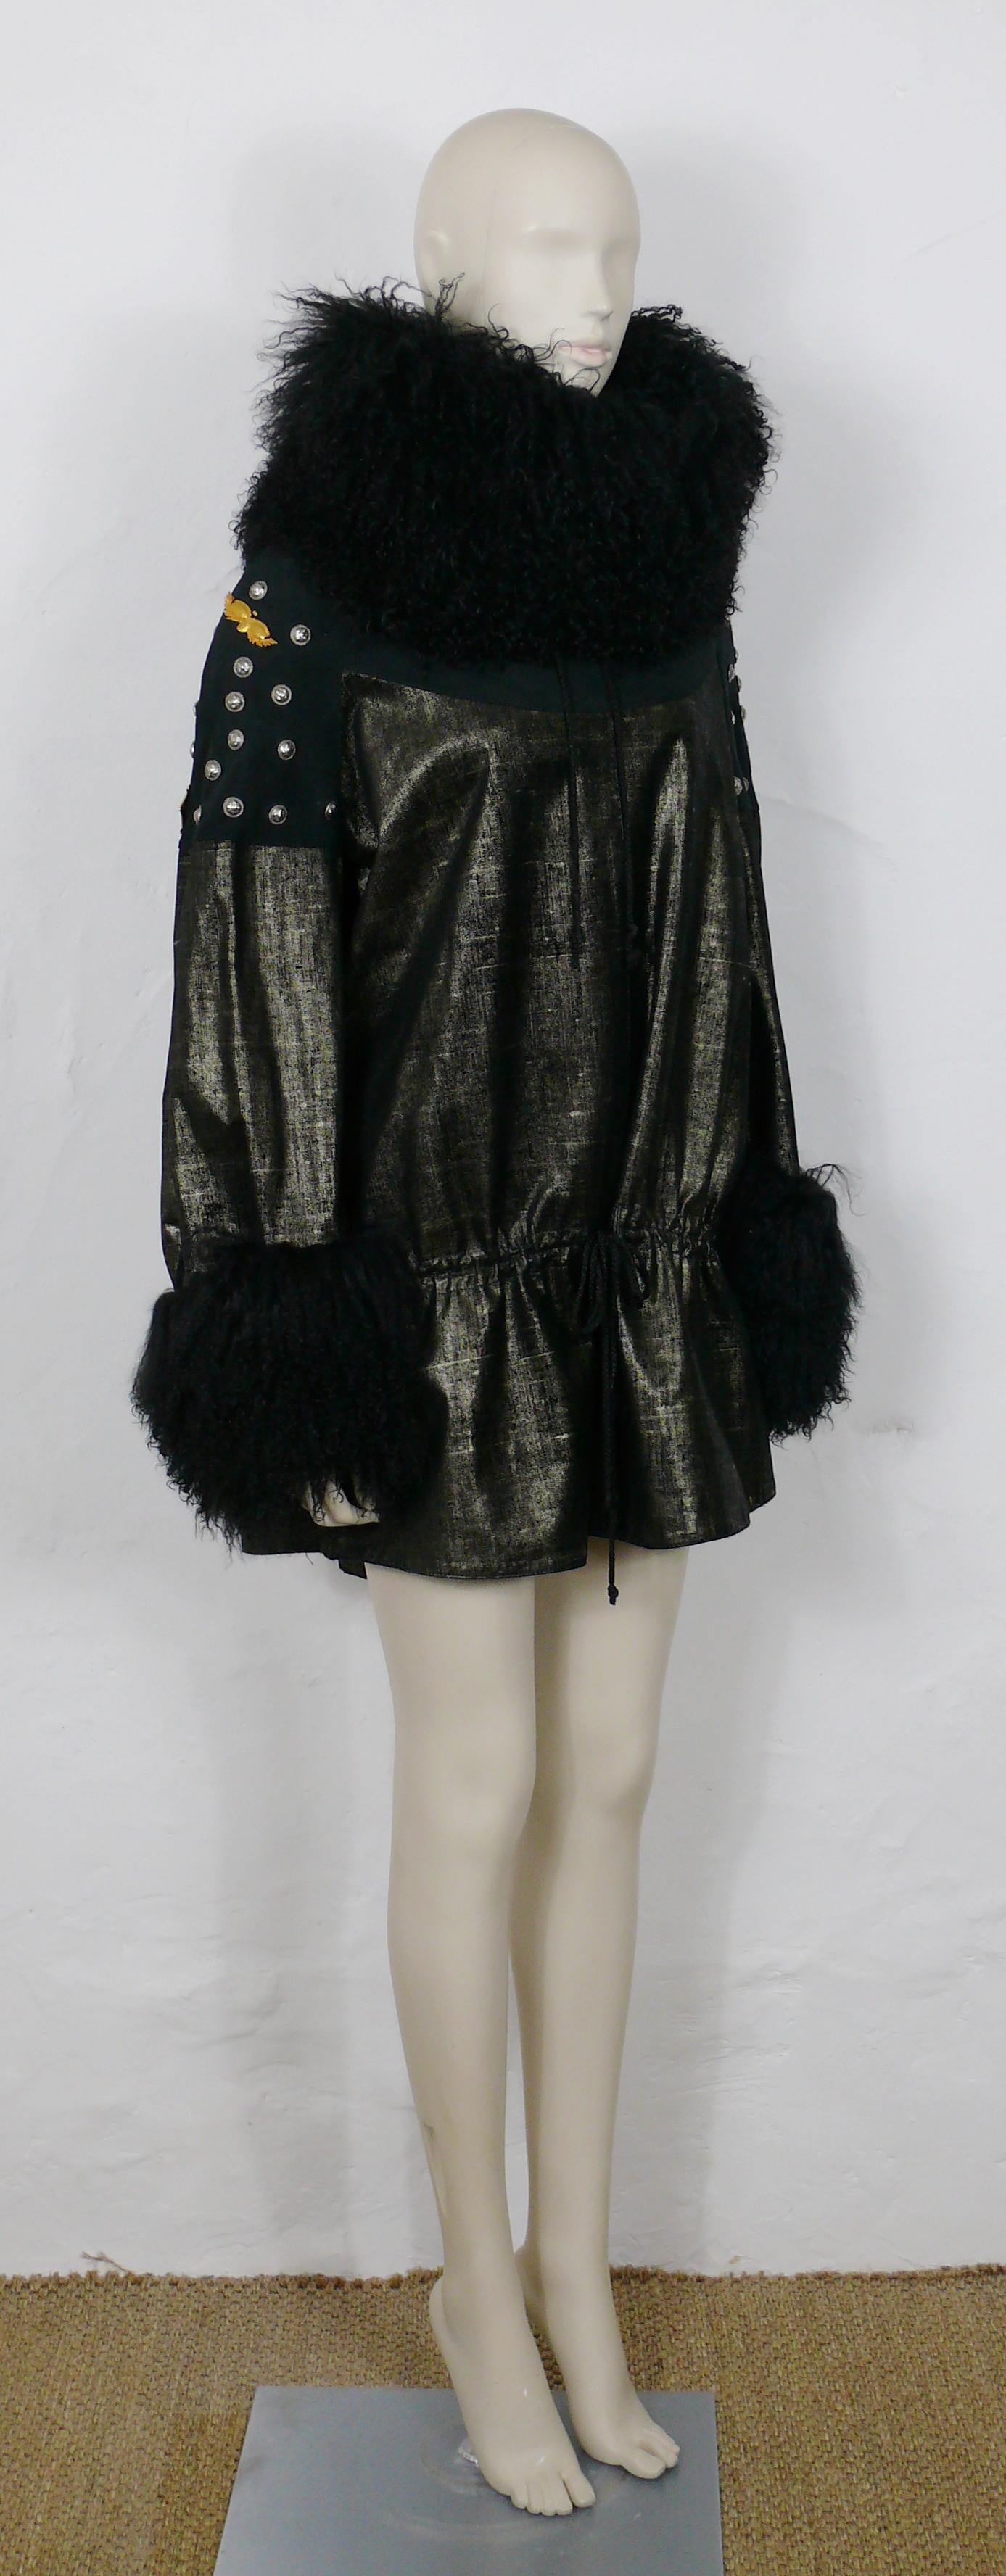 CHRISTIAN LACROIX vintage rare embellished poncho coat.

This coat features :
- Slips on.
- Drawstring waist and collar.
- Gorgeous black and golden bronze coated fabric with black suede details on shoulders, upper bust/back.
- Opulent mongolian